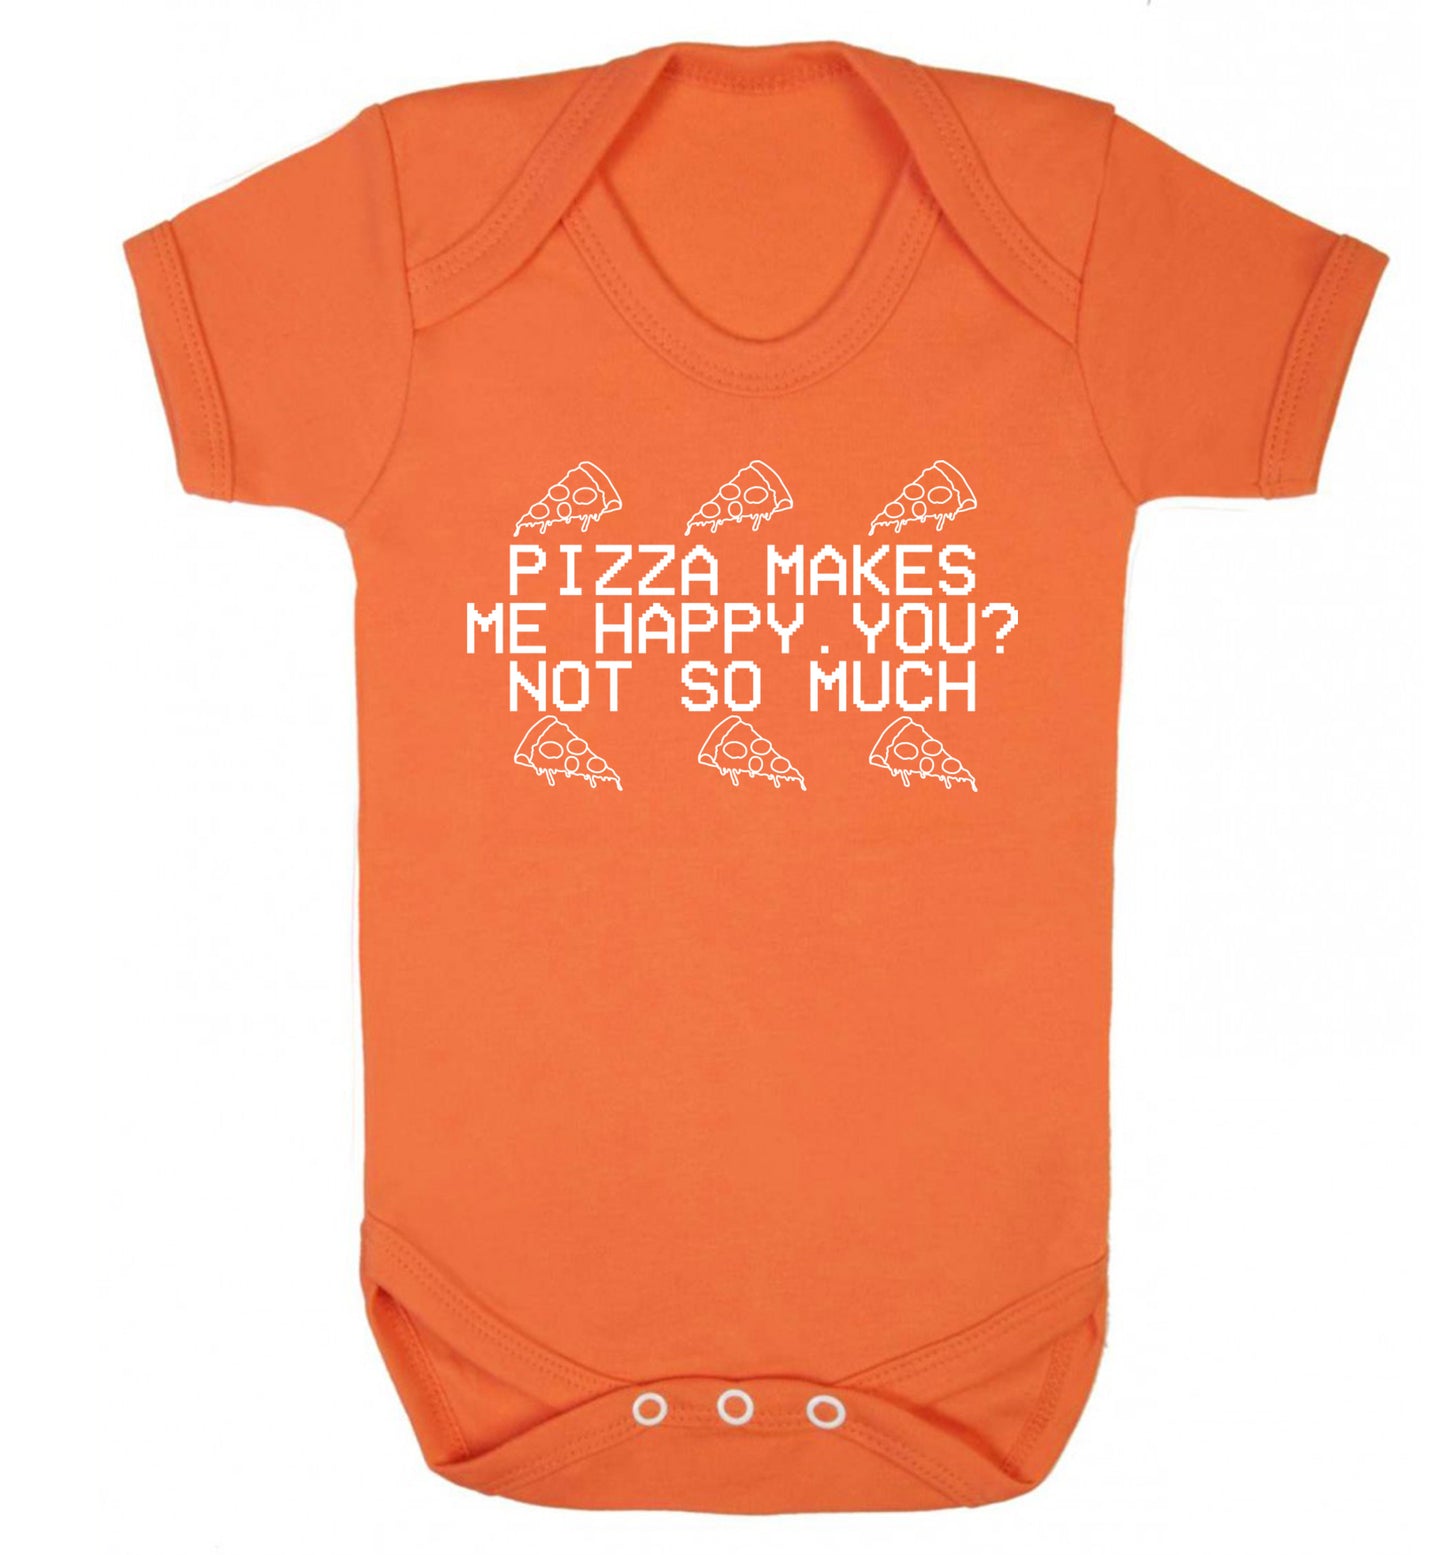 Pizza makes me happy, You? Not so much Baby Vest orange 18-24 months